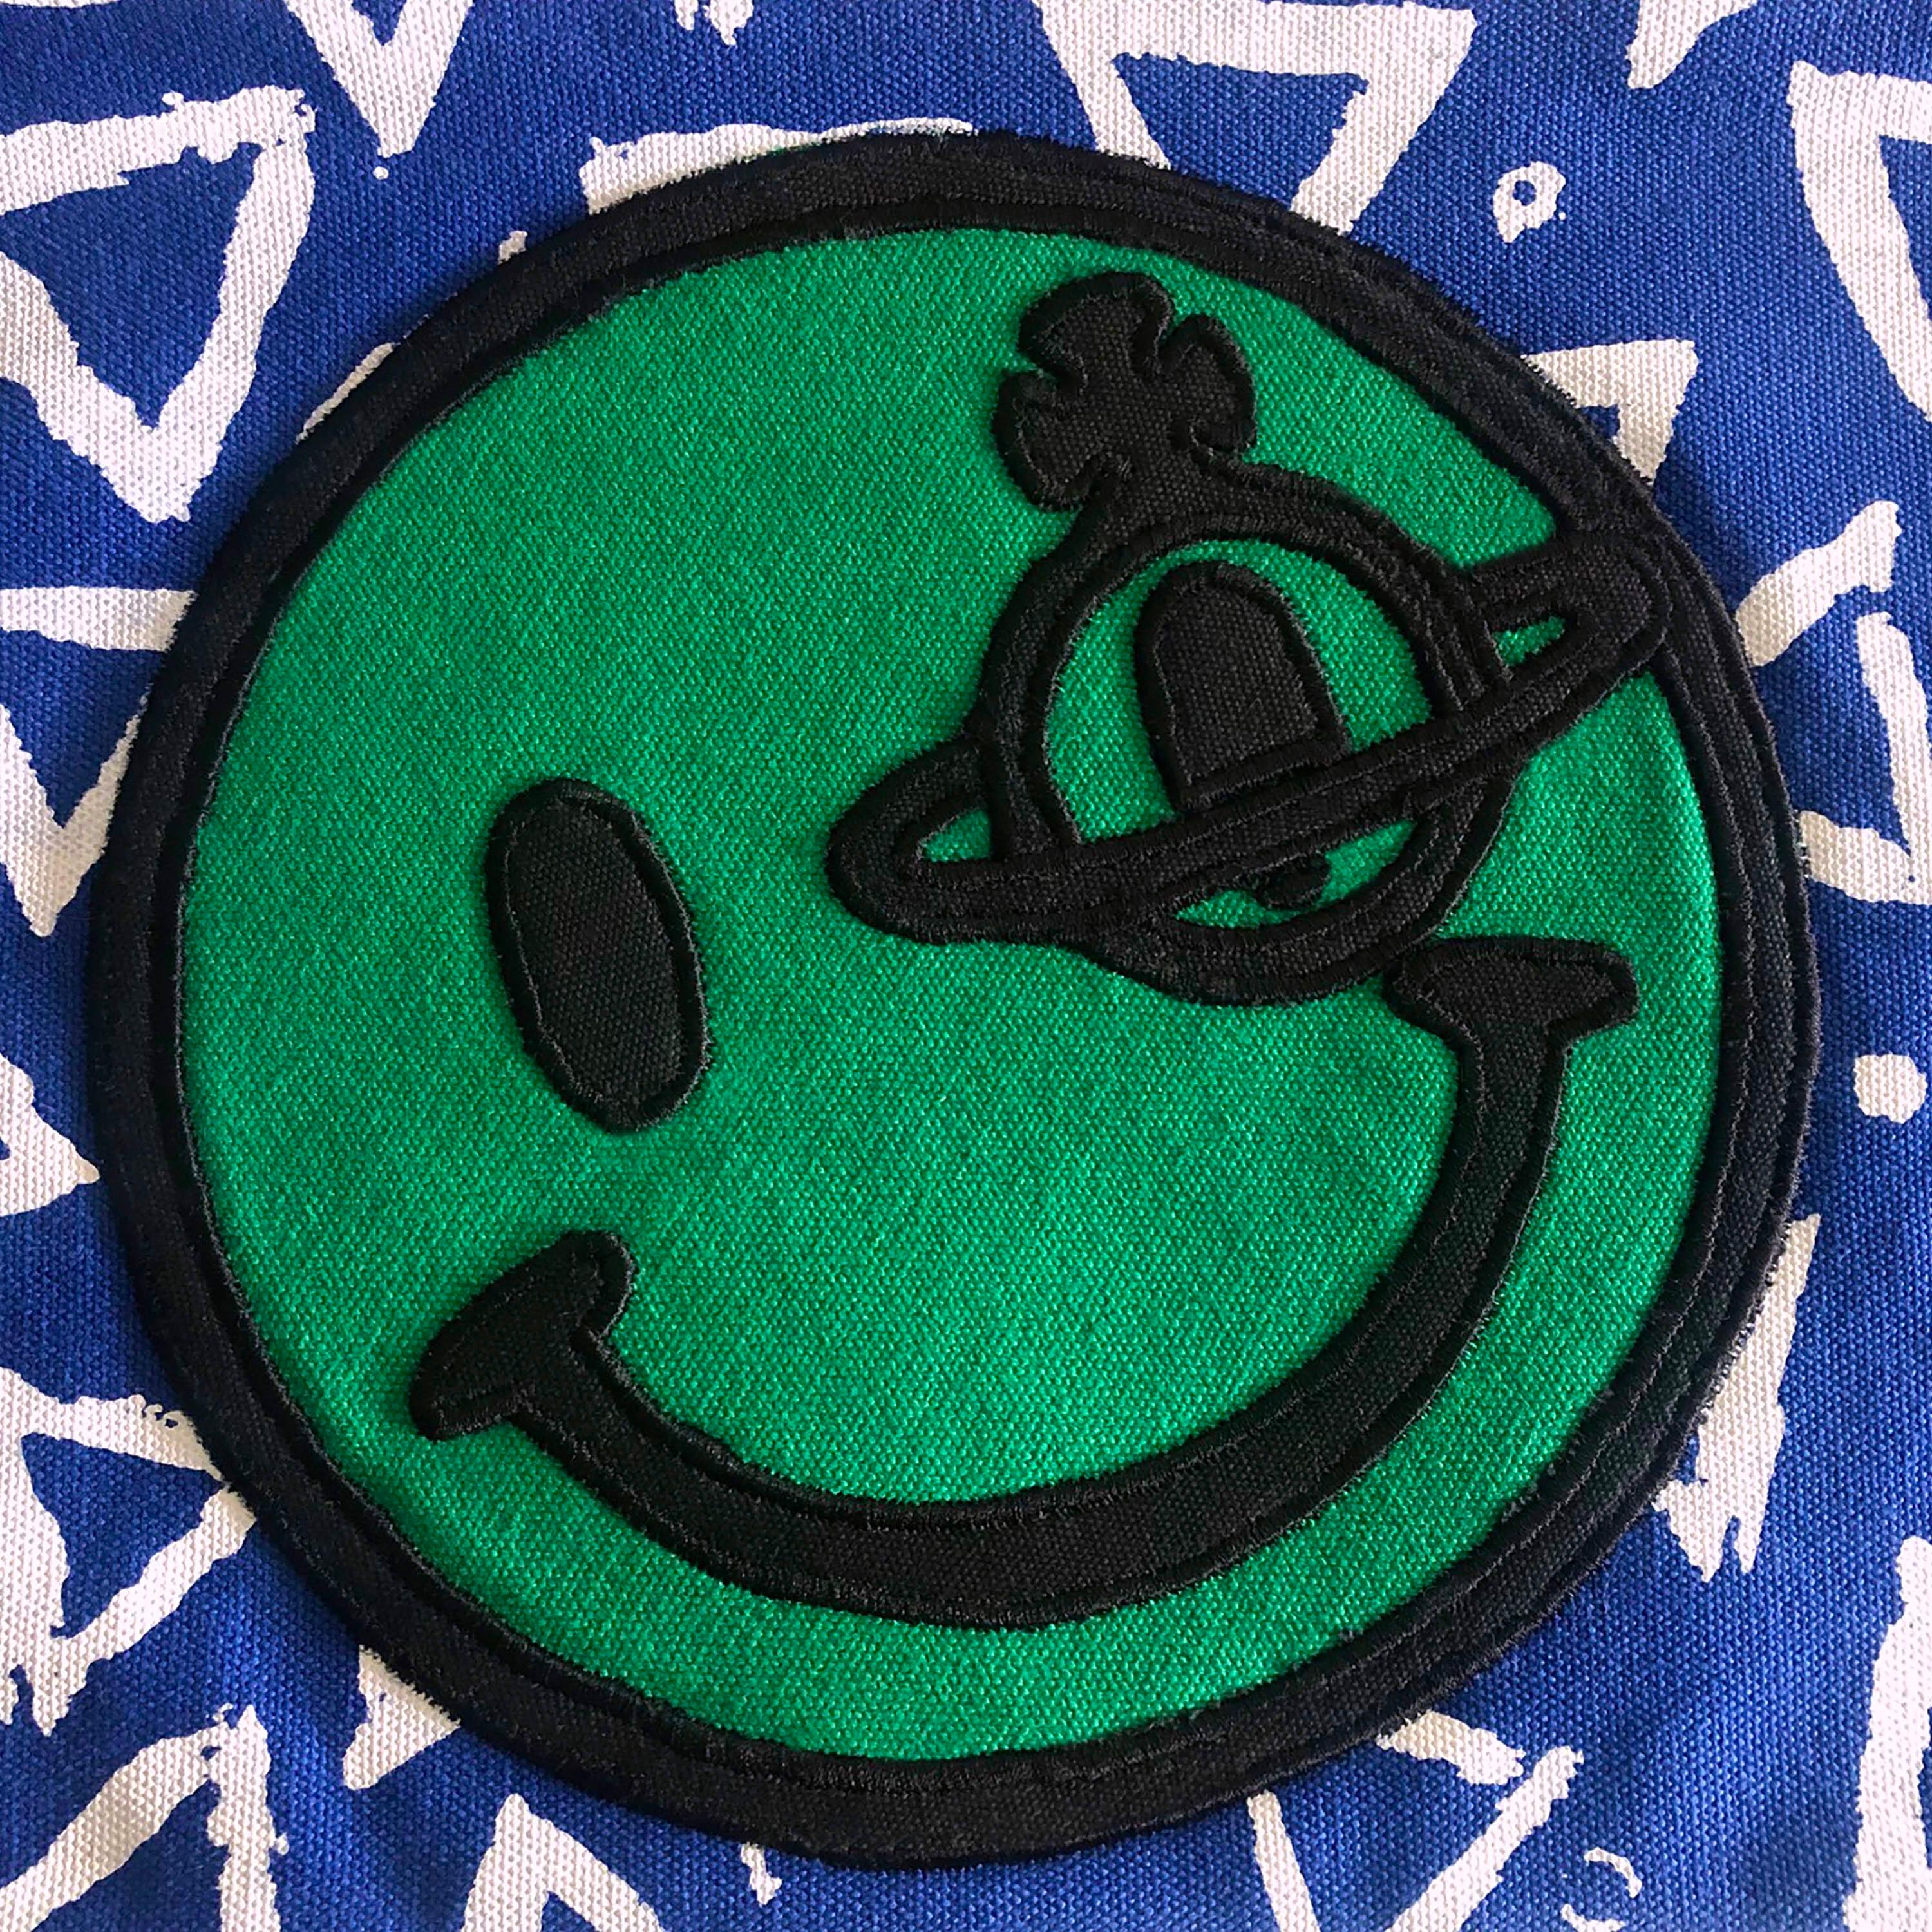 Product Details: Vivienne Westwood - Smiley Zip Pouch / Bag- Embroidered ‘Smiley Face’ & ‘Orb Logo’ Front Detailing - Zip Closure 
Label: Vivienne Westwood - Anglomania
Fabric Content: Heavyweight Cotton Canvas
Size: One Size
Length:  35 cm
Height: 